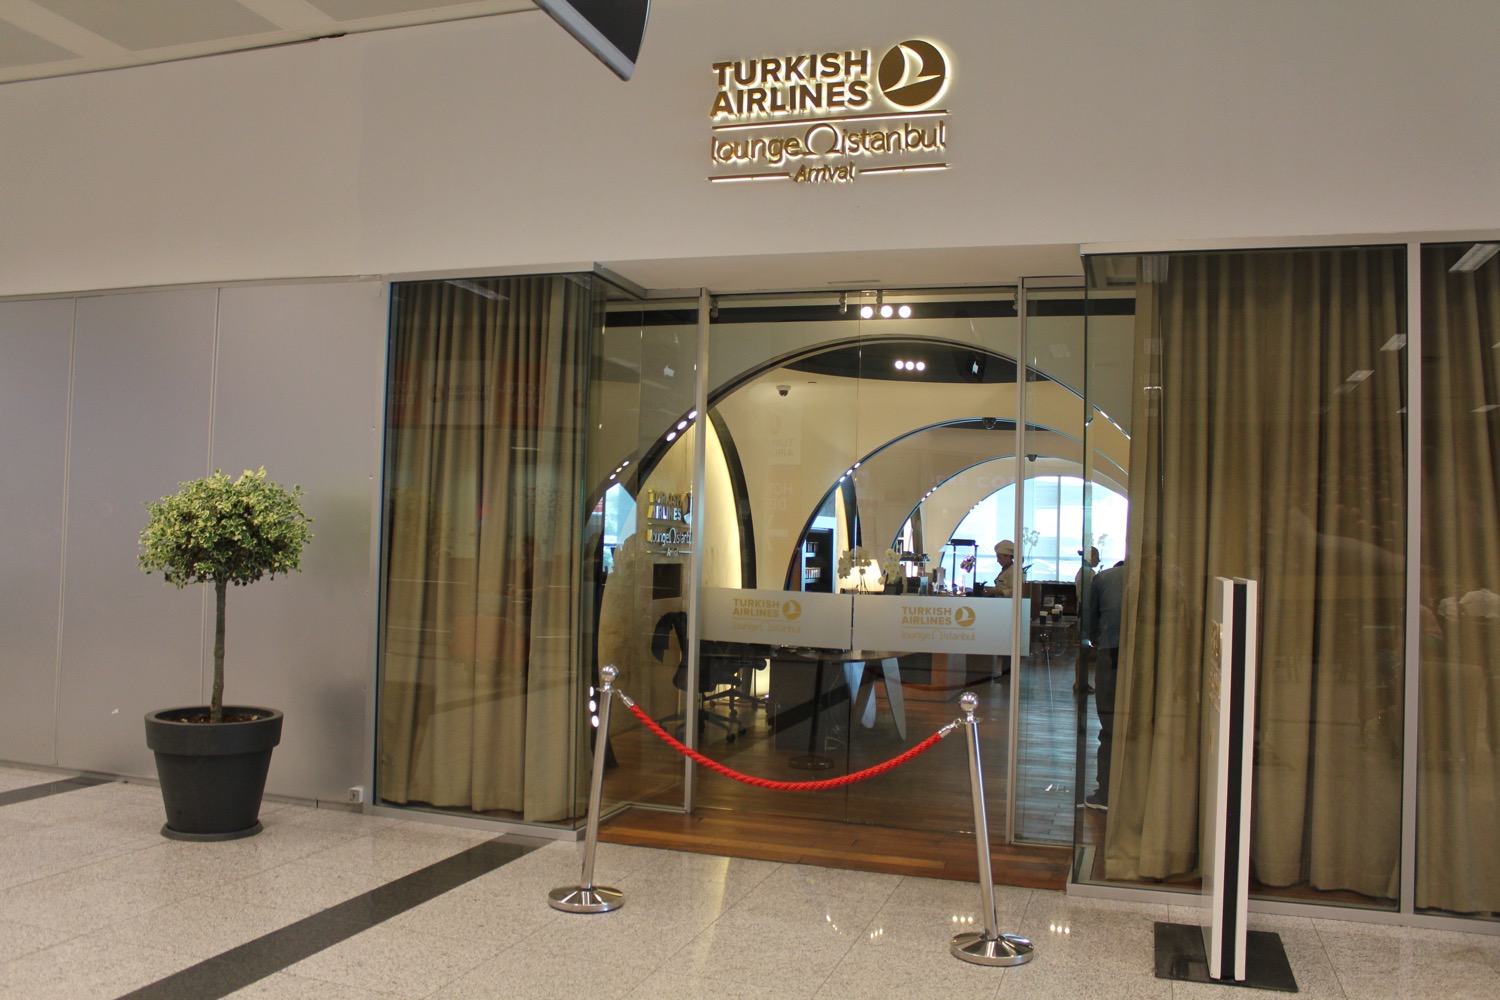 turkish-airlines-arrivals-lounge-istanbul-25